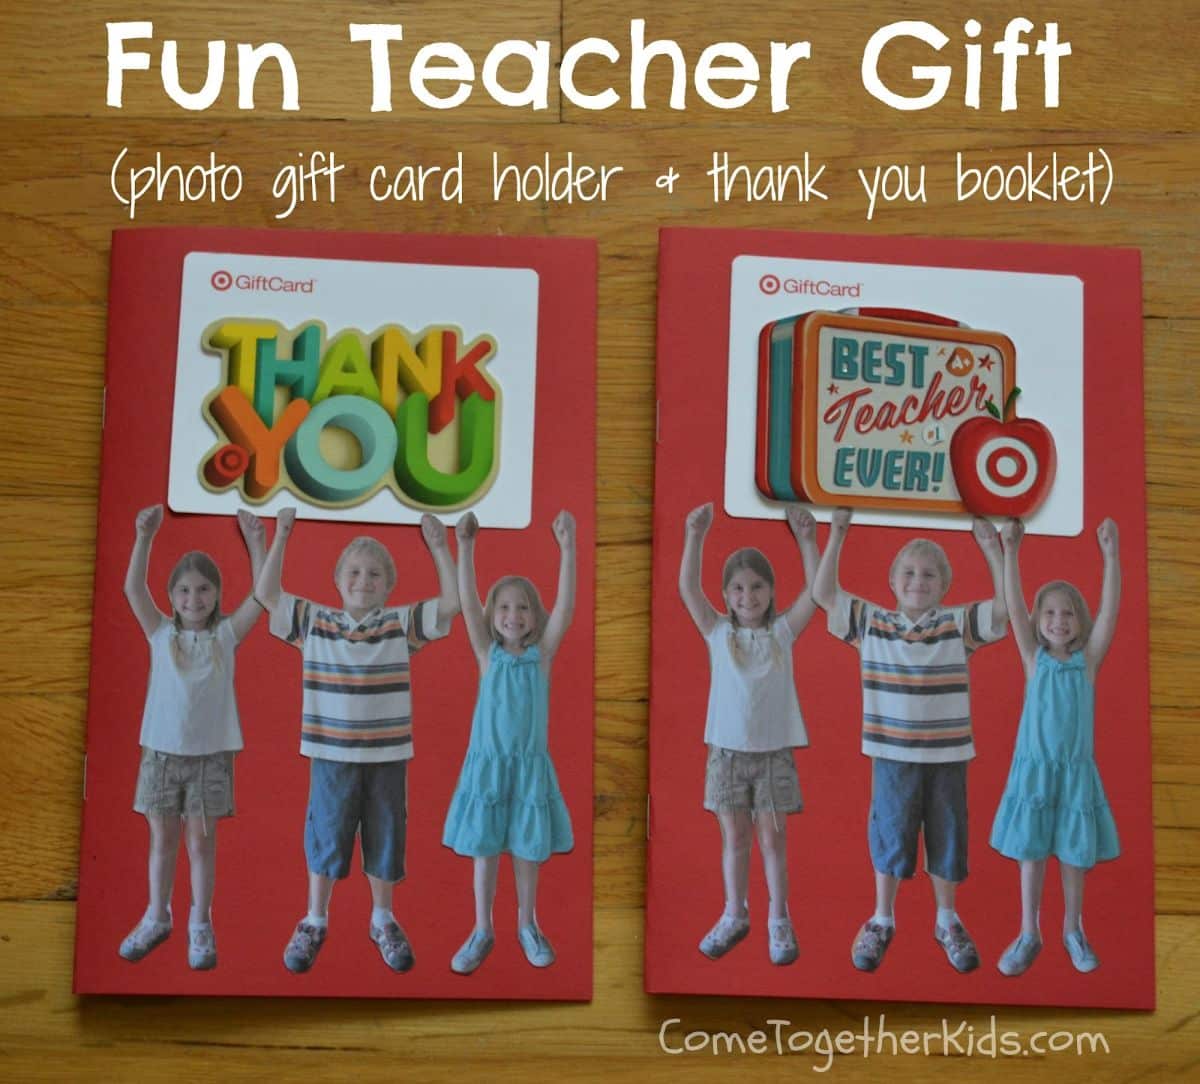 Teacher gift cards with photos of kids on a red papaer. Sign say: Fun teacher gift (photo gift card holder + thank you booklet)